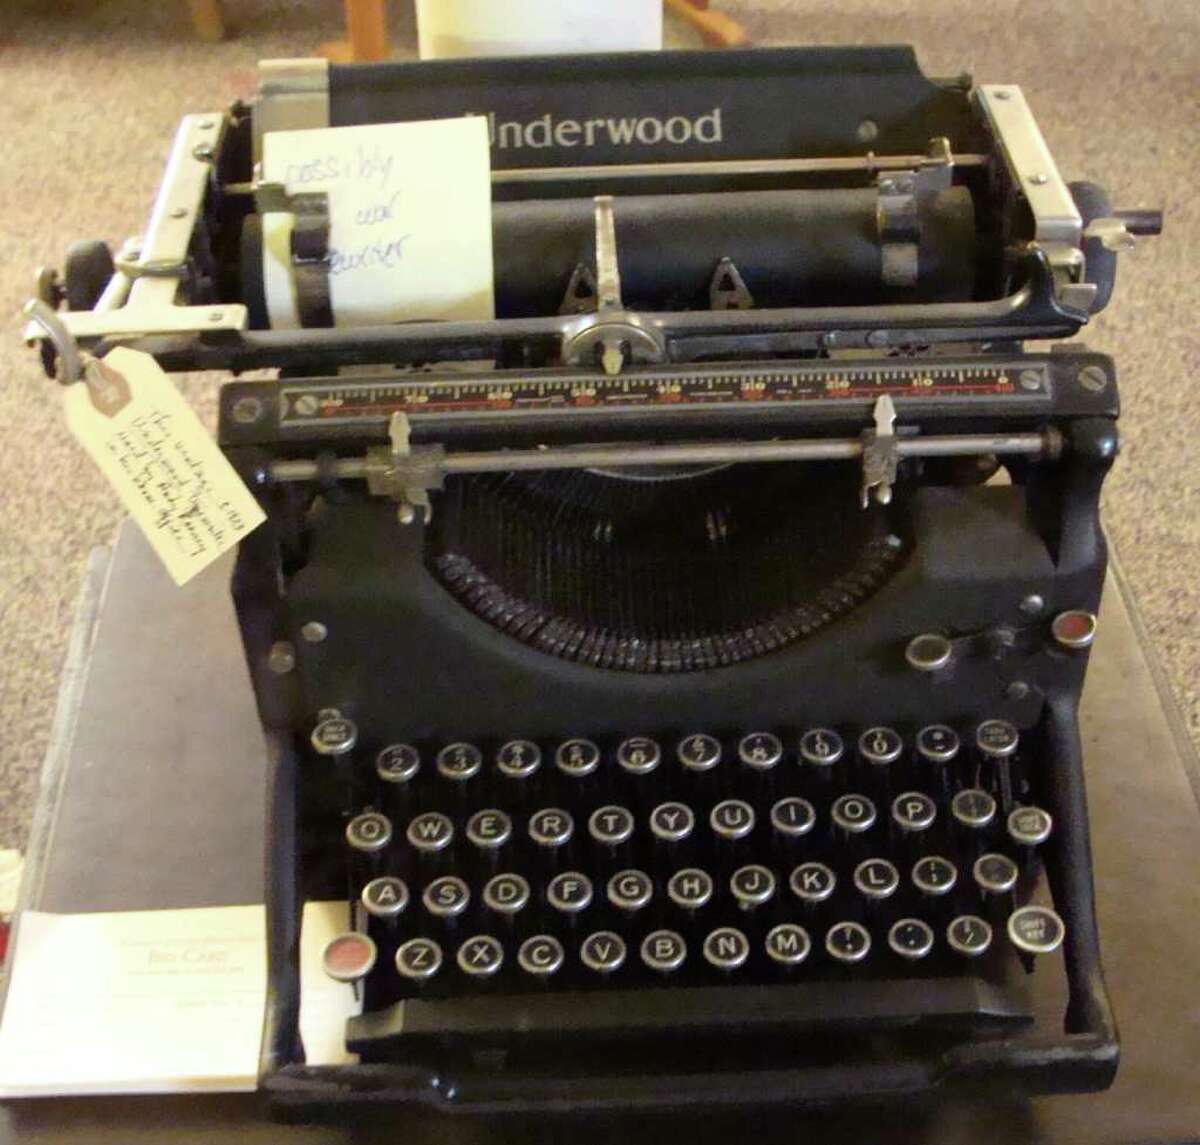 This Underwood typewriter, circa 1923, owned by veteran journalist and commentator Andy Rooney was among the items on sale Friday, the first day of a three-day estate sale at Rooney's home in the Rowayton section of Norwalk.